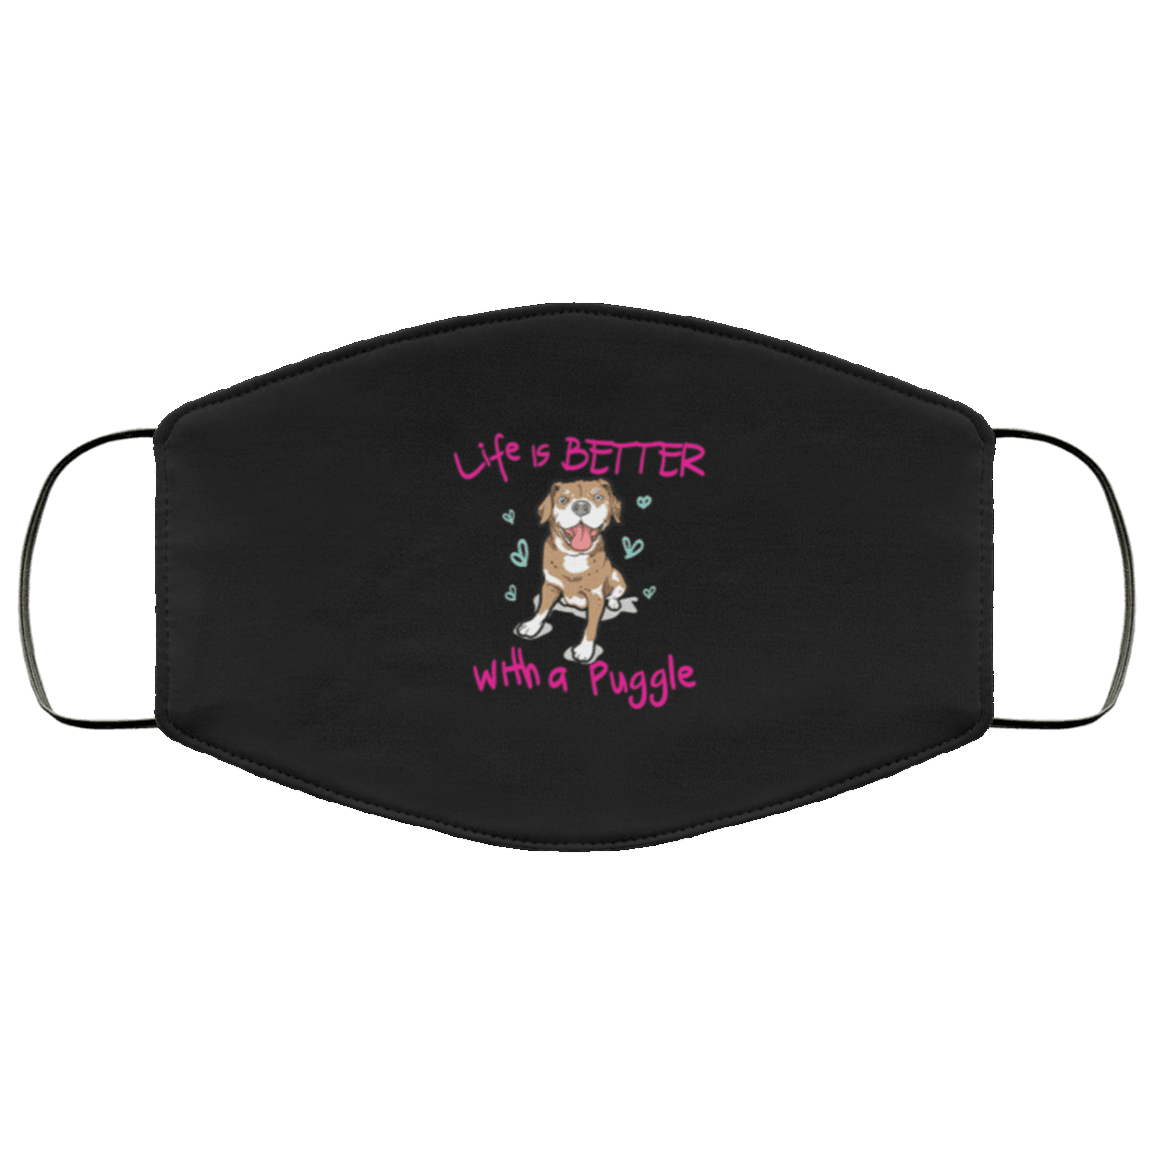 Designs by MyUtopia Shout Out:Life Is Better with a Puggle Adult Fabric Face Mask with Elastic Ear Loops,3 Layer Fabric Face Mask / Black / Adult,Fabric Face Mask